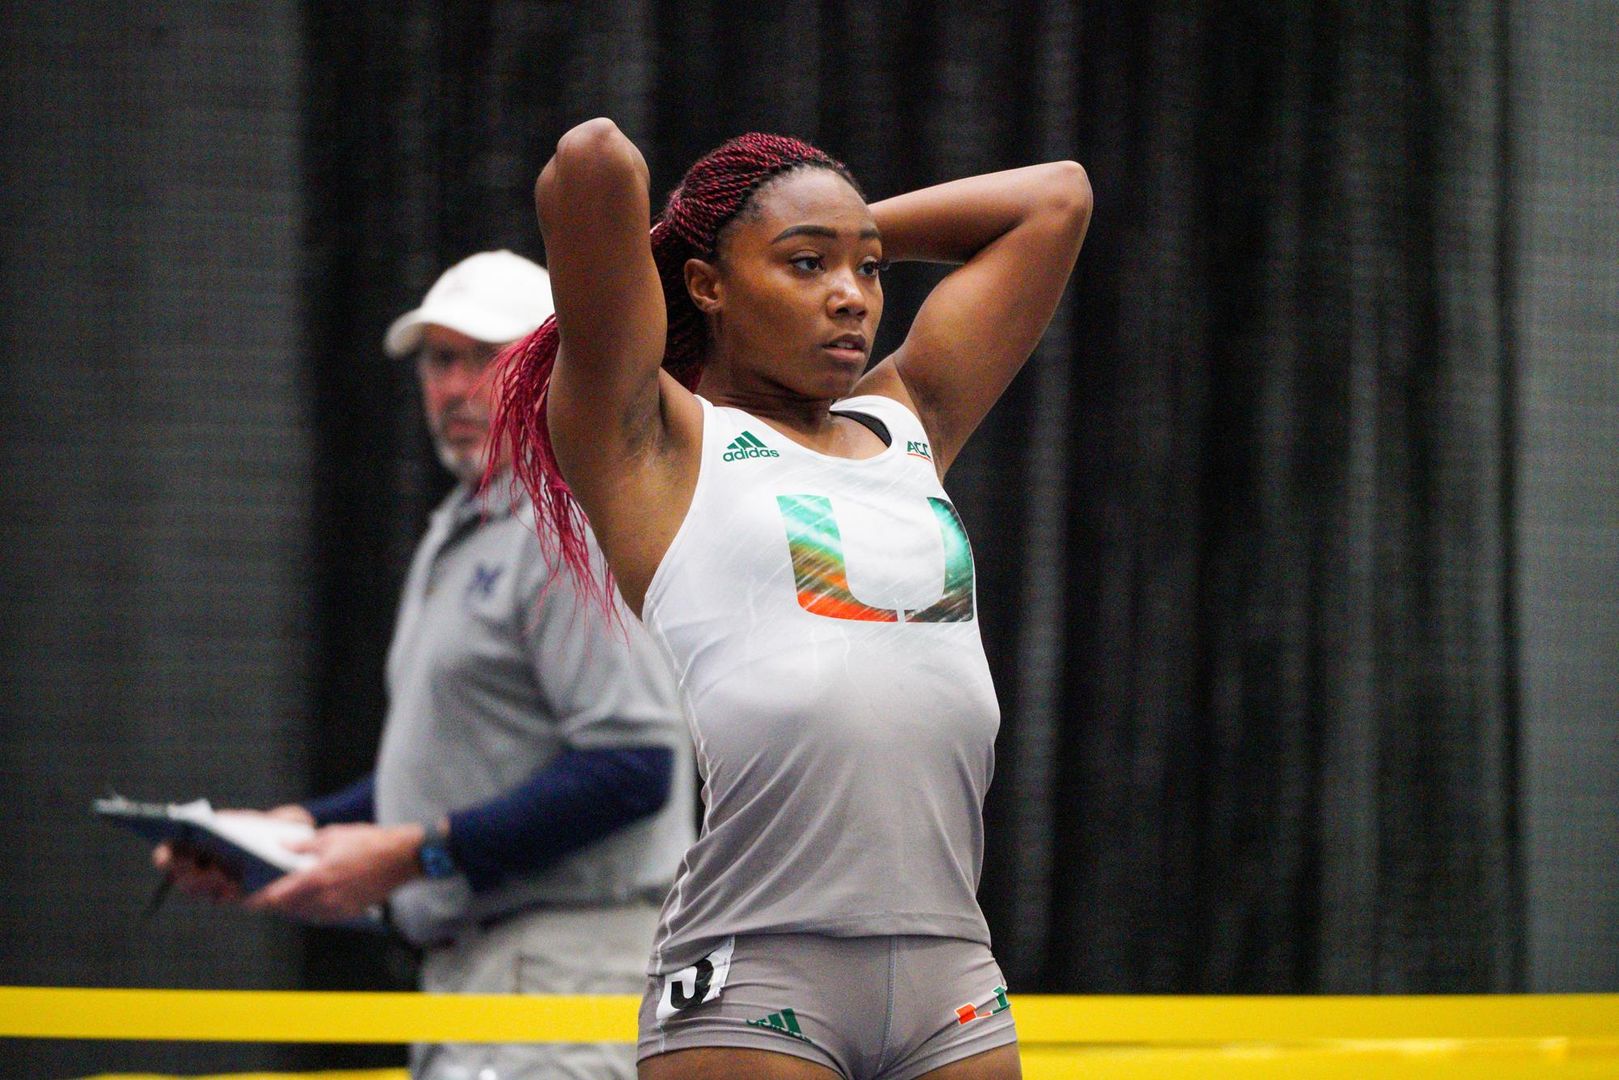 Canes Travel to Lubbock for Texas Tech Invitational